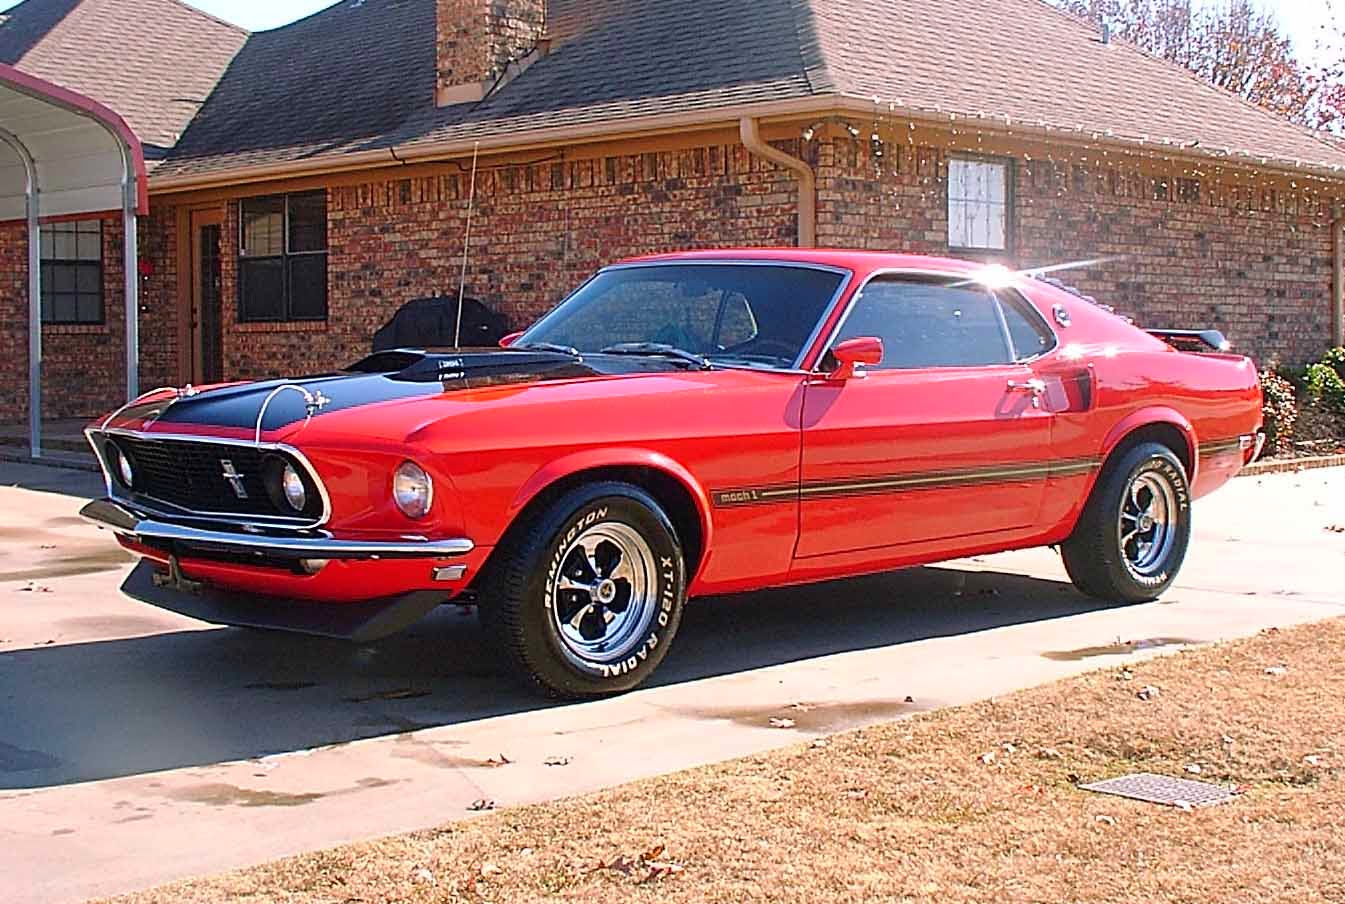 Away From The Things Of Man: My Favorite Muscle Cars